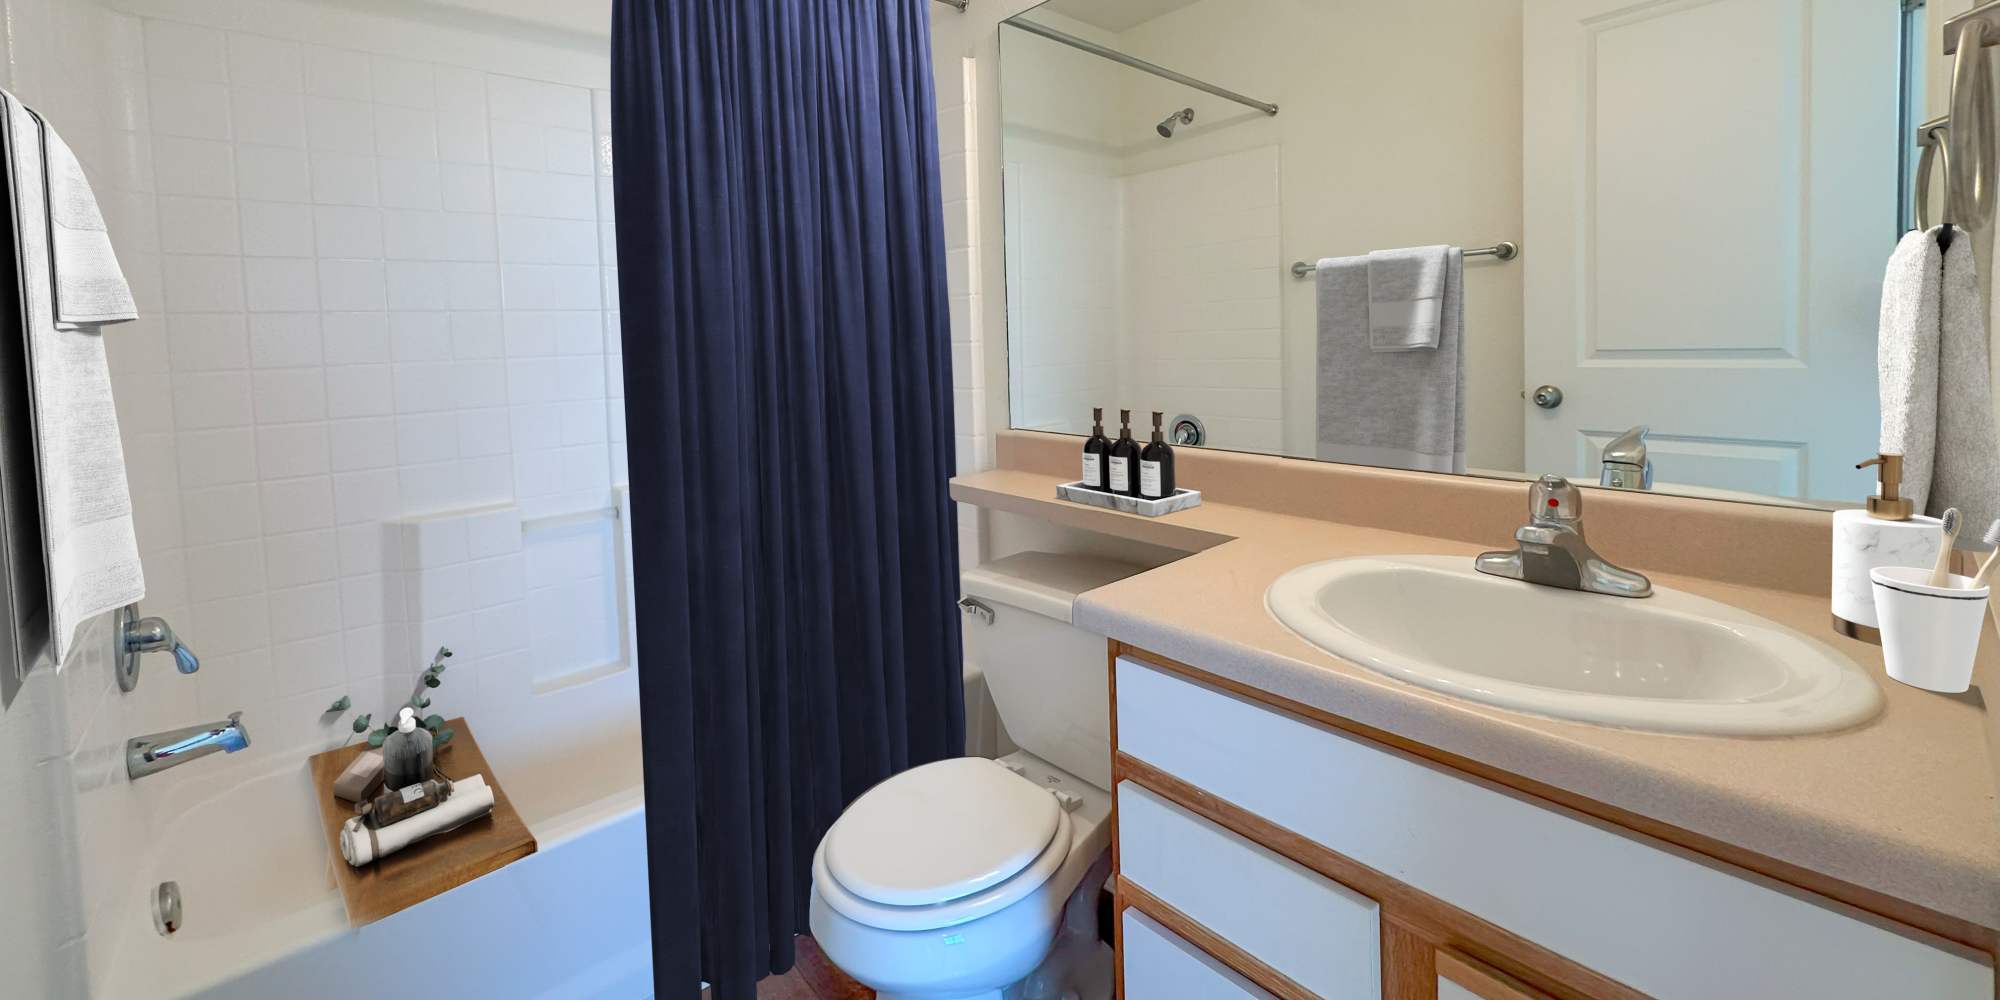 Bathroom with shower, bathtub, toilet and sink at Liberty Hill in Draper, Utah